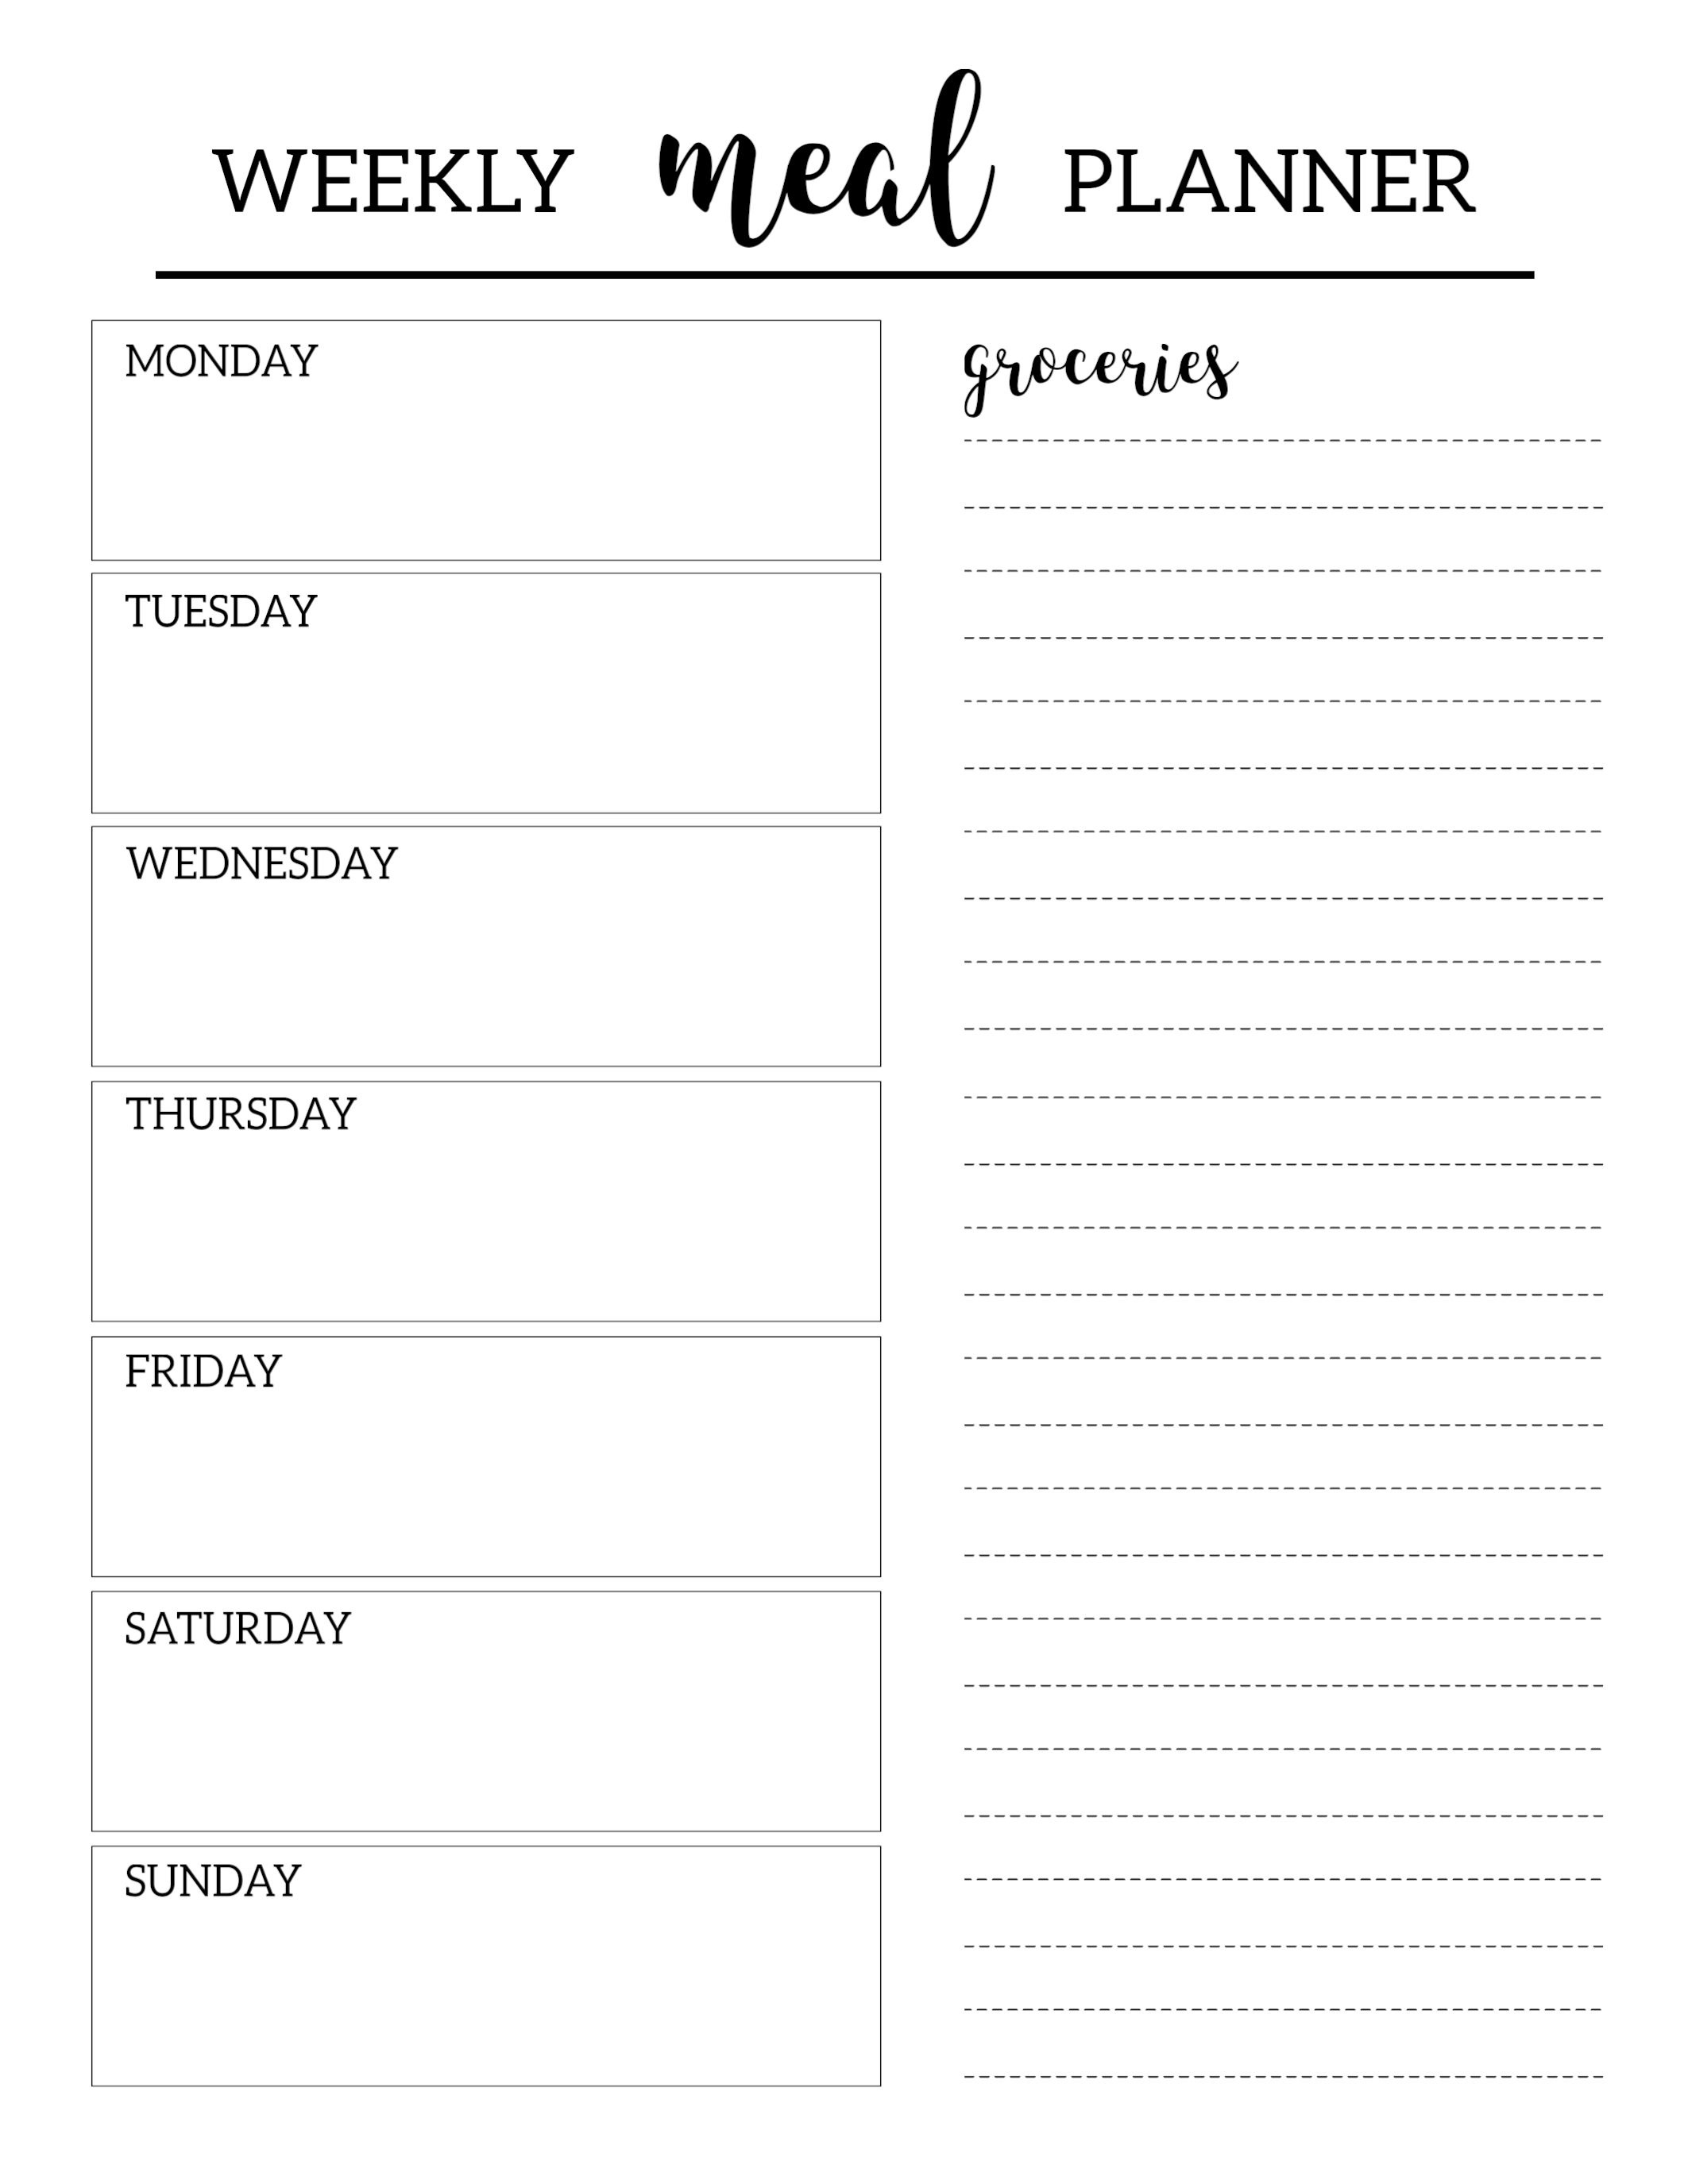 Free Printable Meal Planner Template | Printables | Meal Planner - Weekly Menu Free Printable